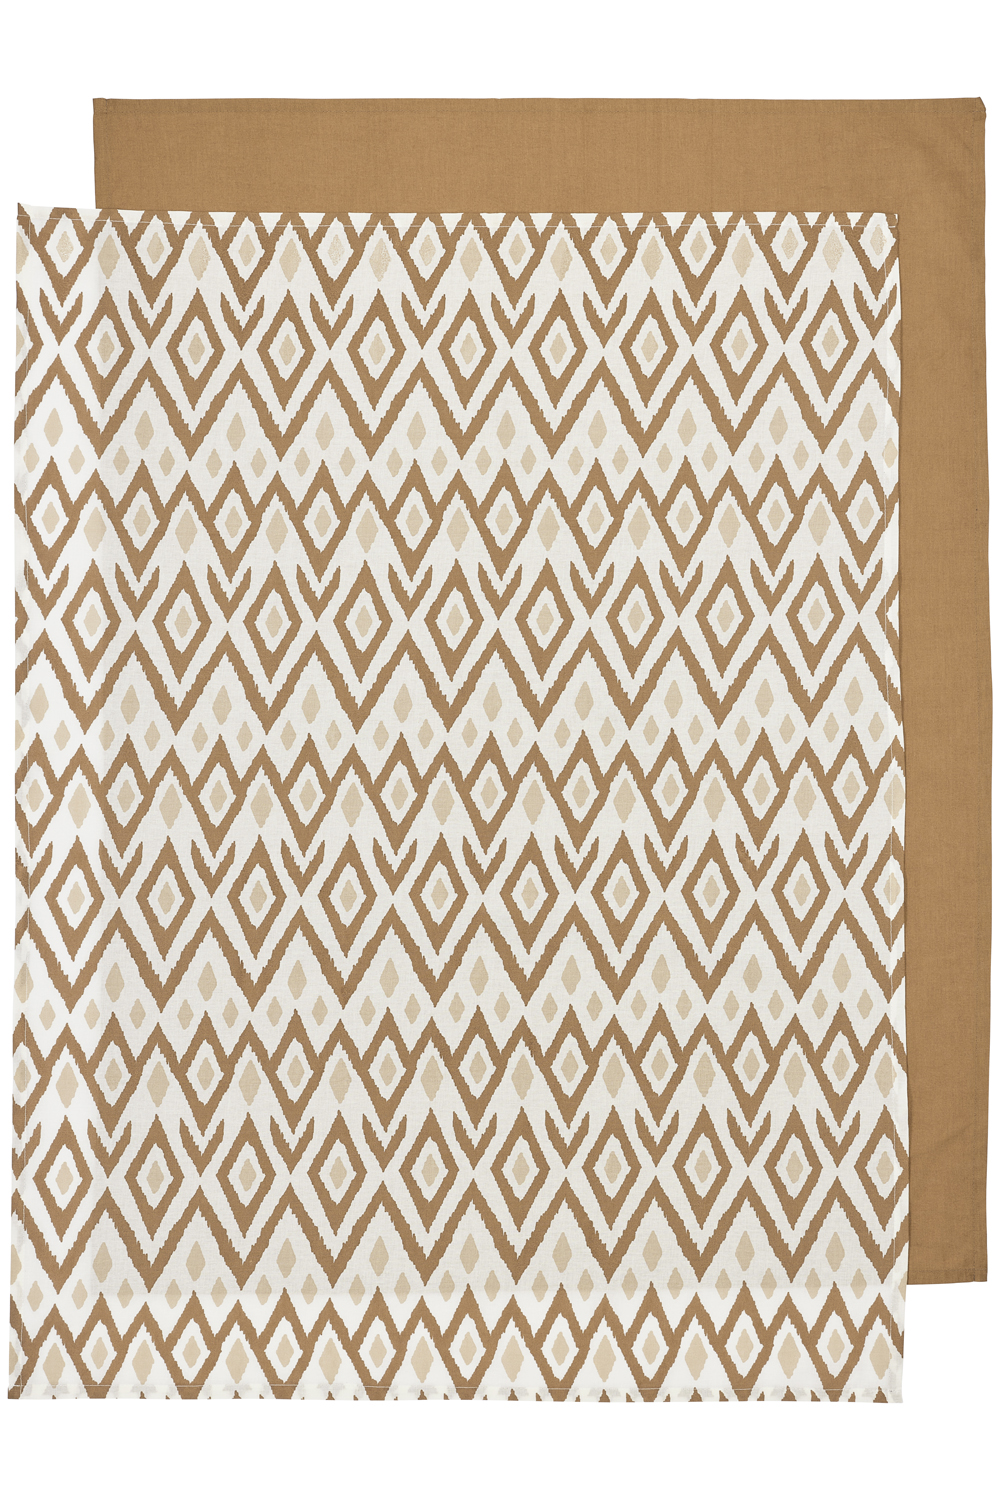 Cot Bed Sheet 2-pack Ikat/Uni - Sand/Toffee - 100x150cm